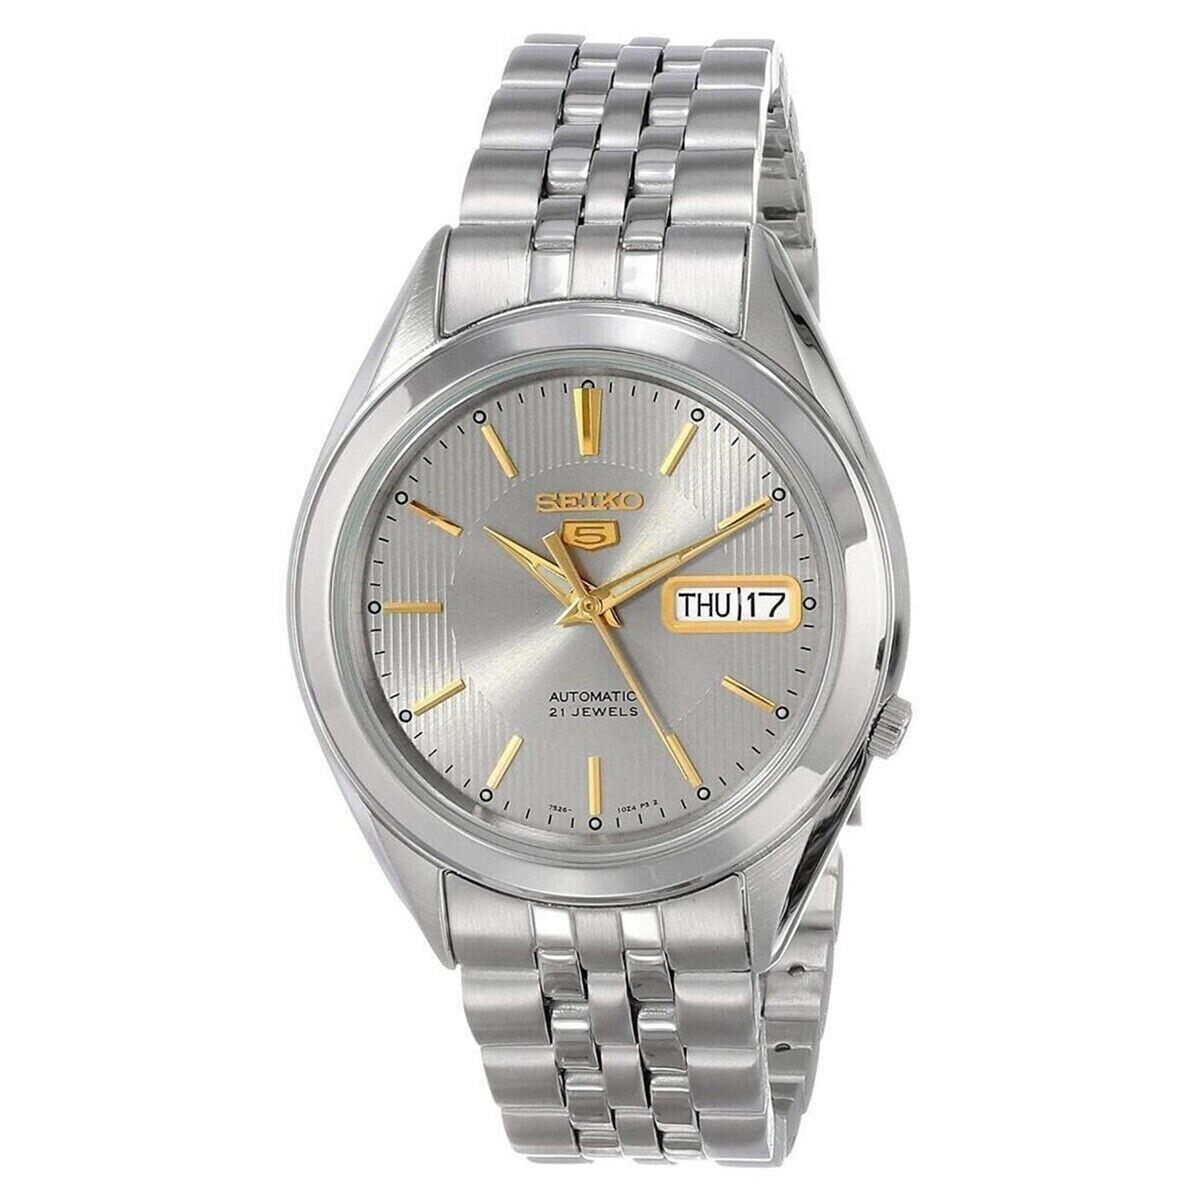 Seiko 5 SNKL19 Automatic Day-date Gray Dial Stainless Steel Men Watch SNKL19K1